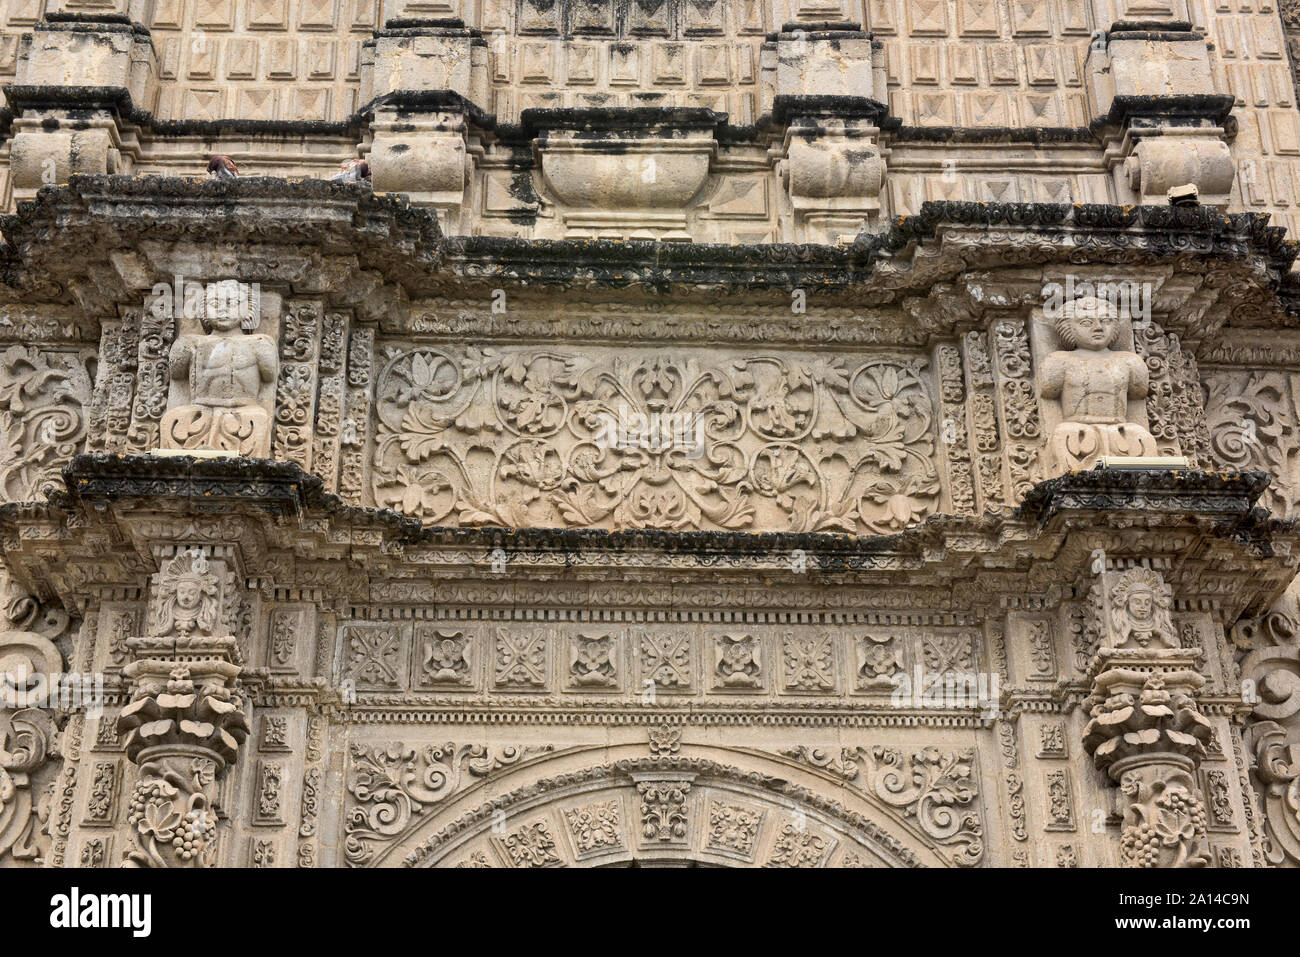 Stone carvings front the Baroque style Cajamarca Cathedral, Cajamarca, Peru Stock Photo